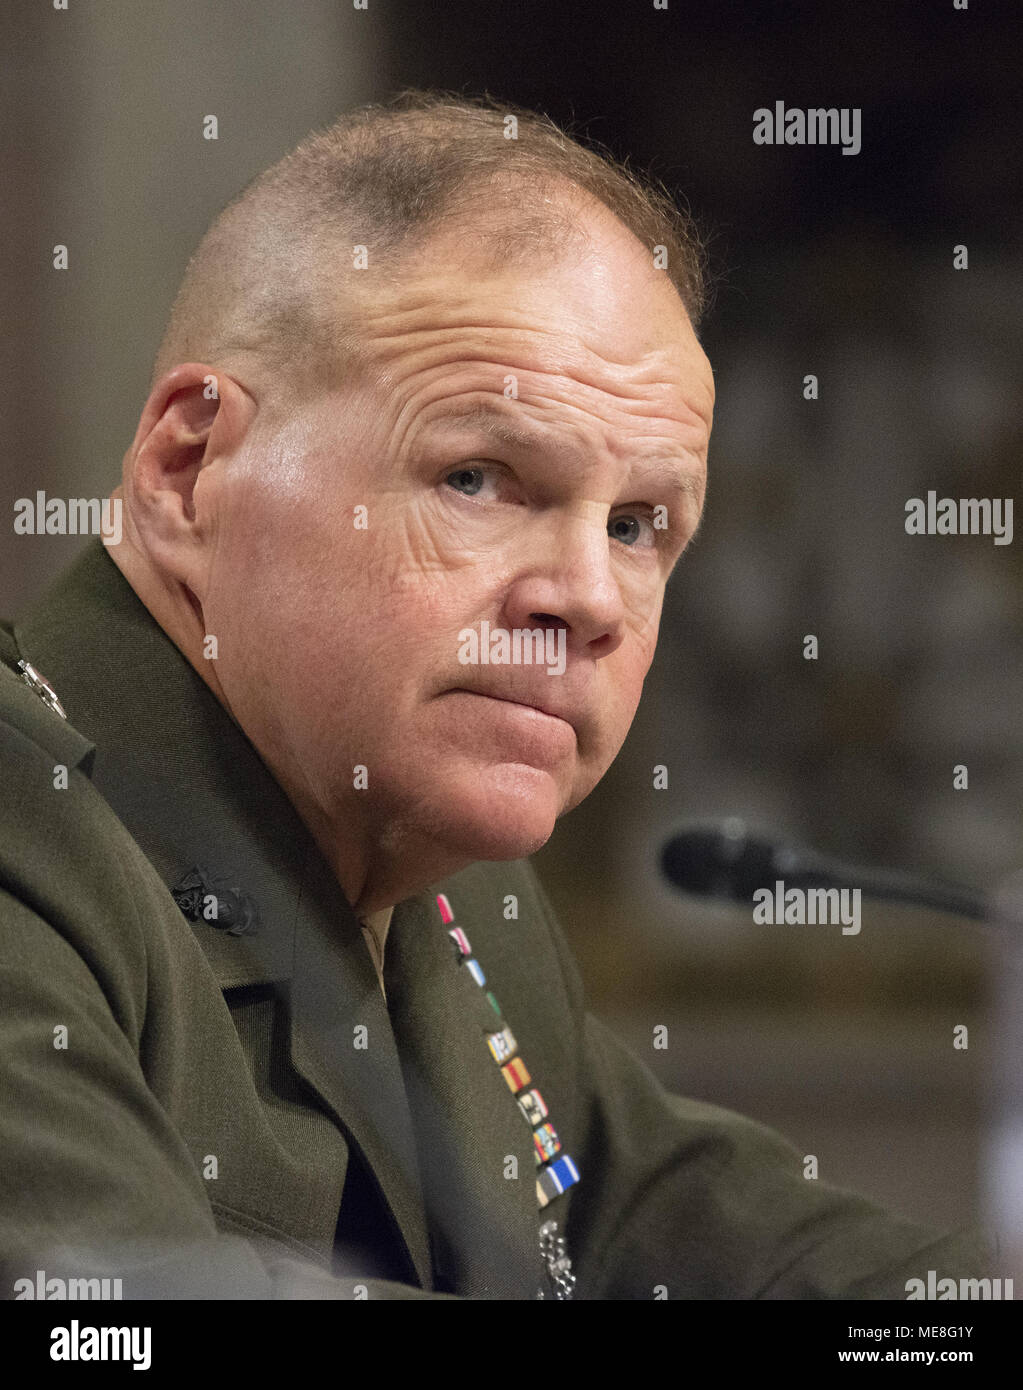 April 19, 2018 - Washington, District of Columbia, United States of America - United States Marine Corps General Robert B. Neller, Commandant of the US Marine Corps, testifies before the US Senate Committee on Armed Services ''on the posture of the Department of the Navy in review of the Defense Authorization Request for Fiscal Year 2019 and the Future Years Defense Program'' on Thursday, April 19, 2018..Credit: Ron Sachs / CNP (Credit Image: © Ron Sachs/CNP via ZUMA Wire) Stock Photo